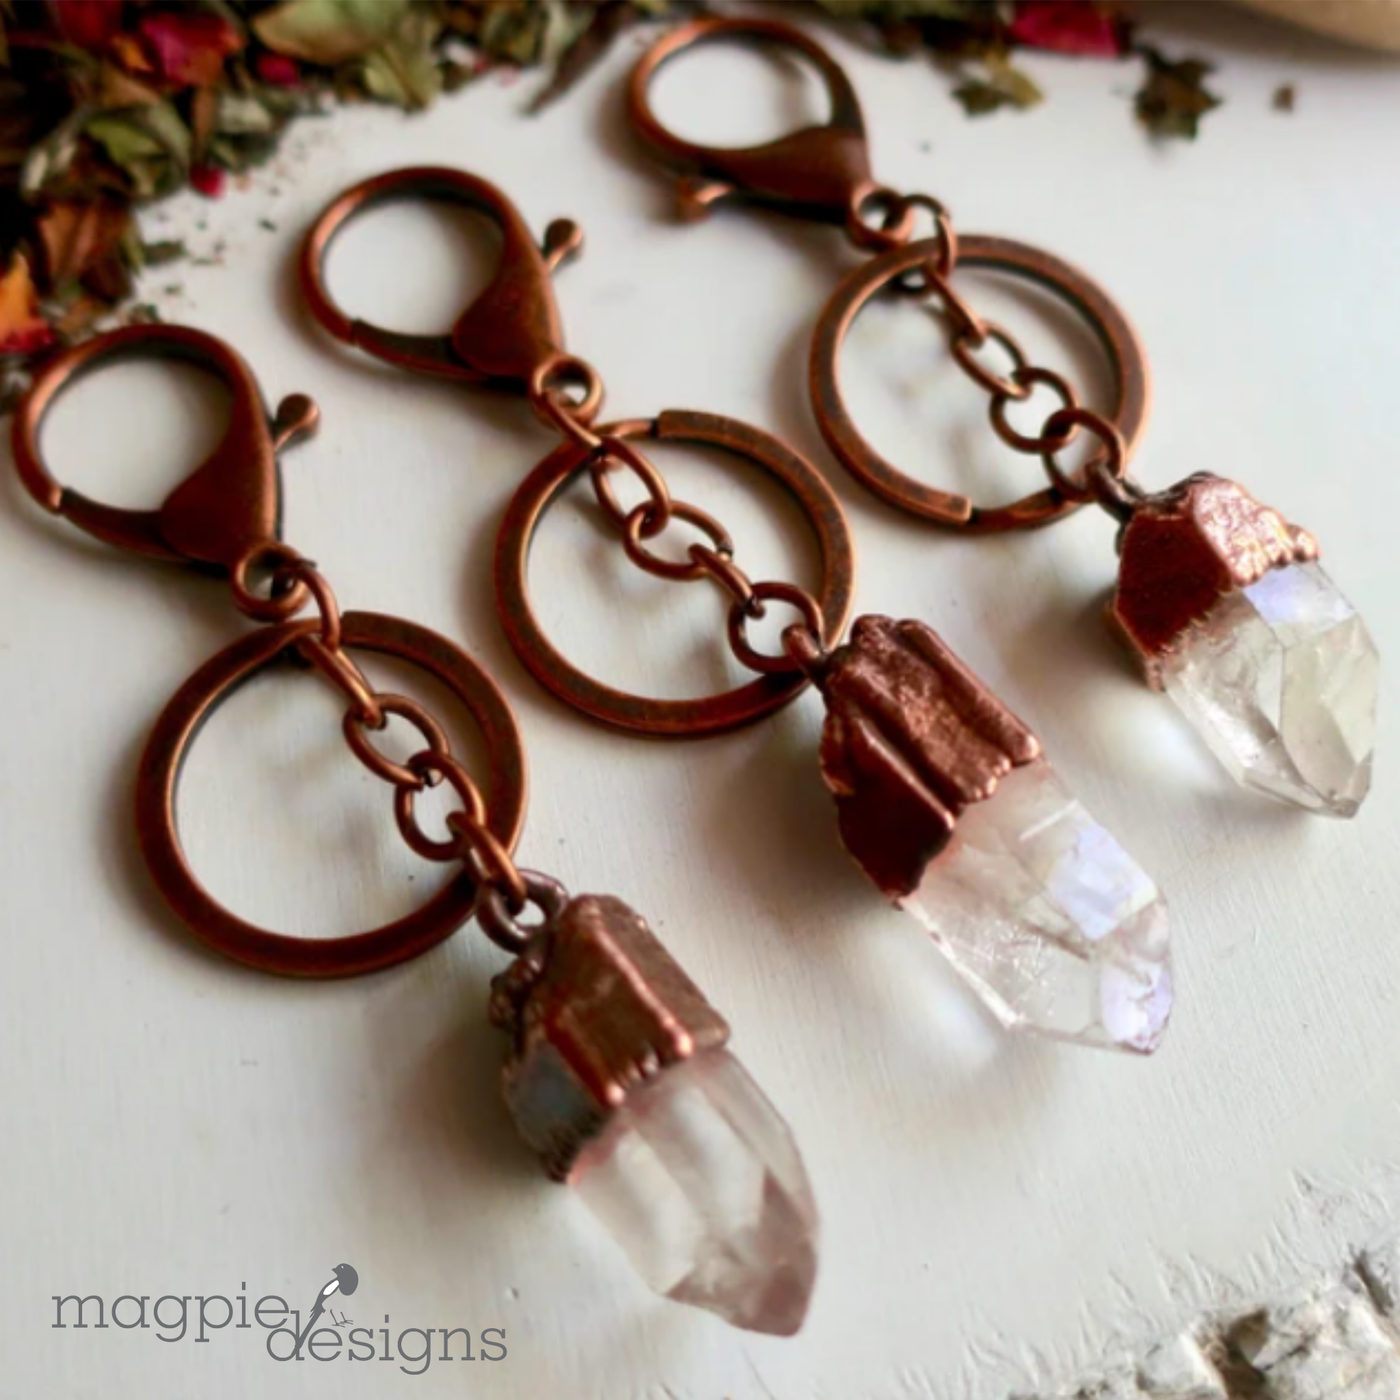 Clear Quartz Keychain. Magpie Designs a boutique clothing and gift store located in downtown Gillette, Wyoming